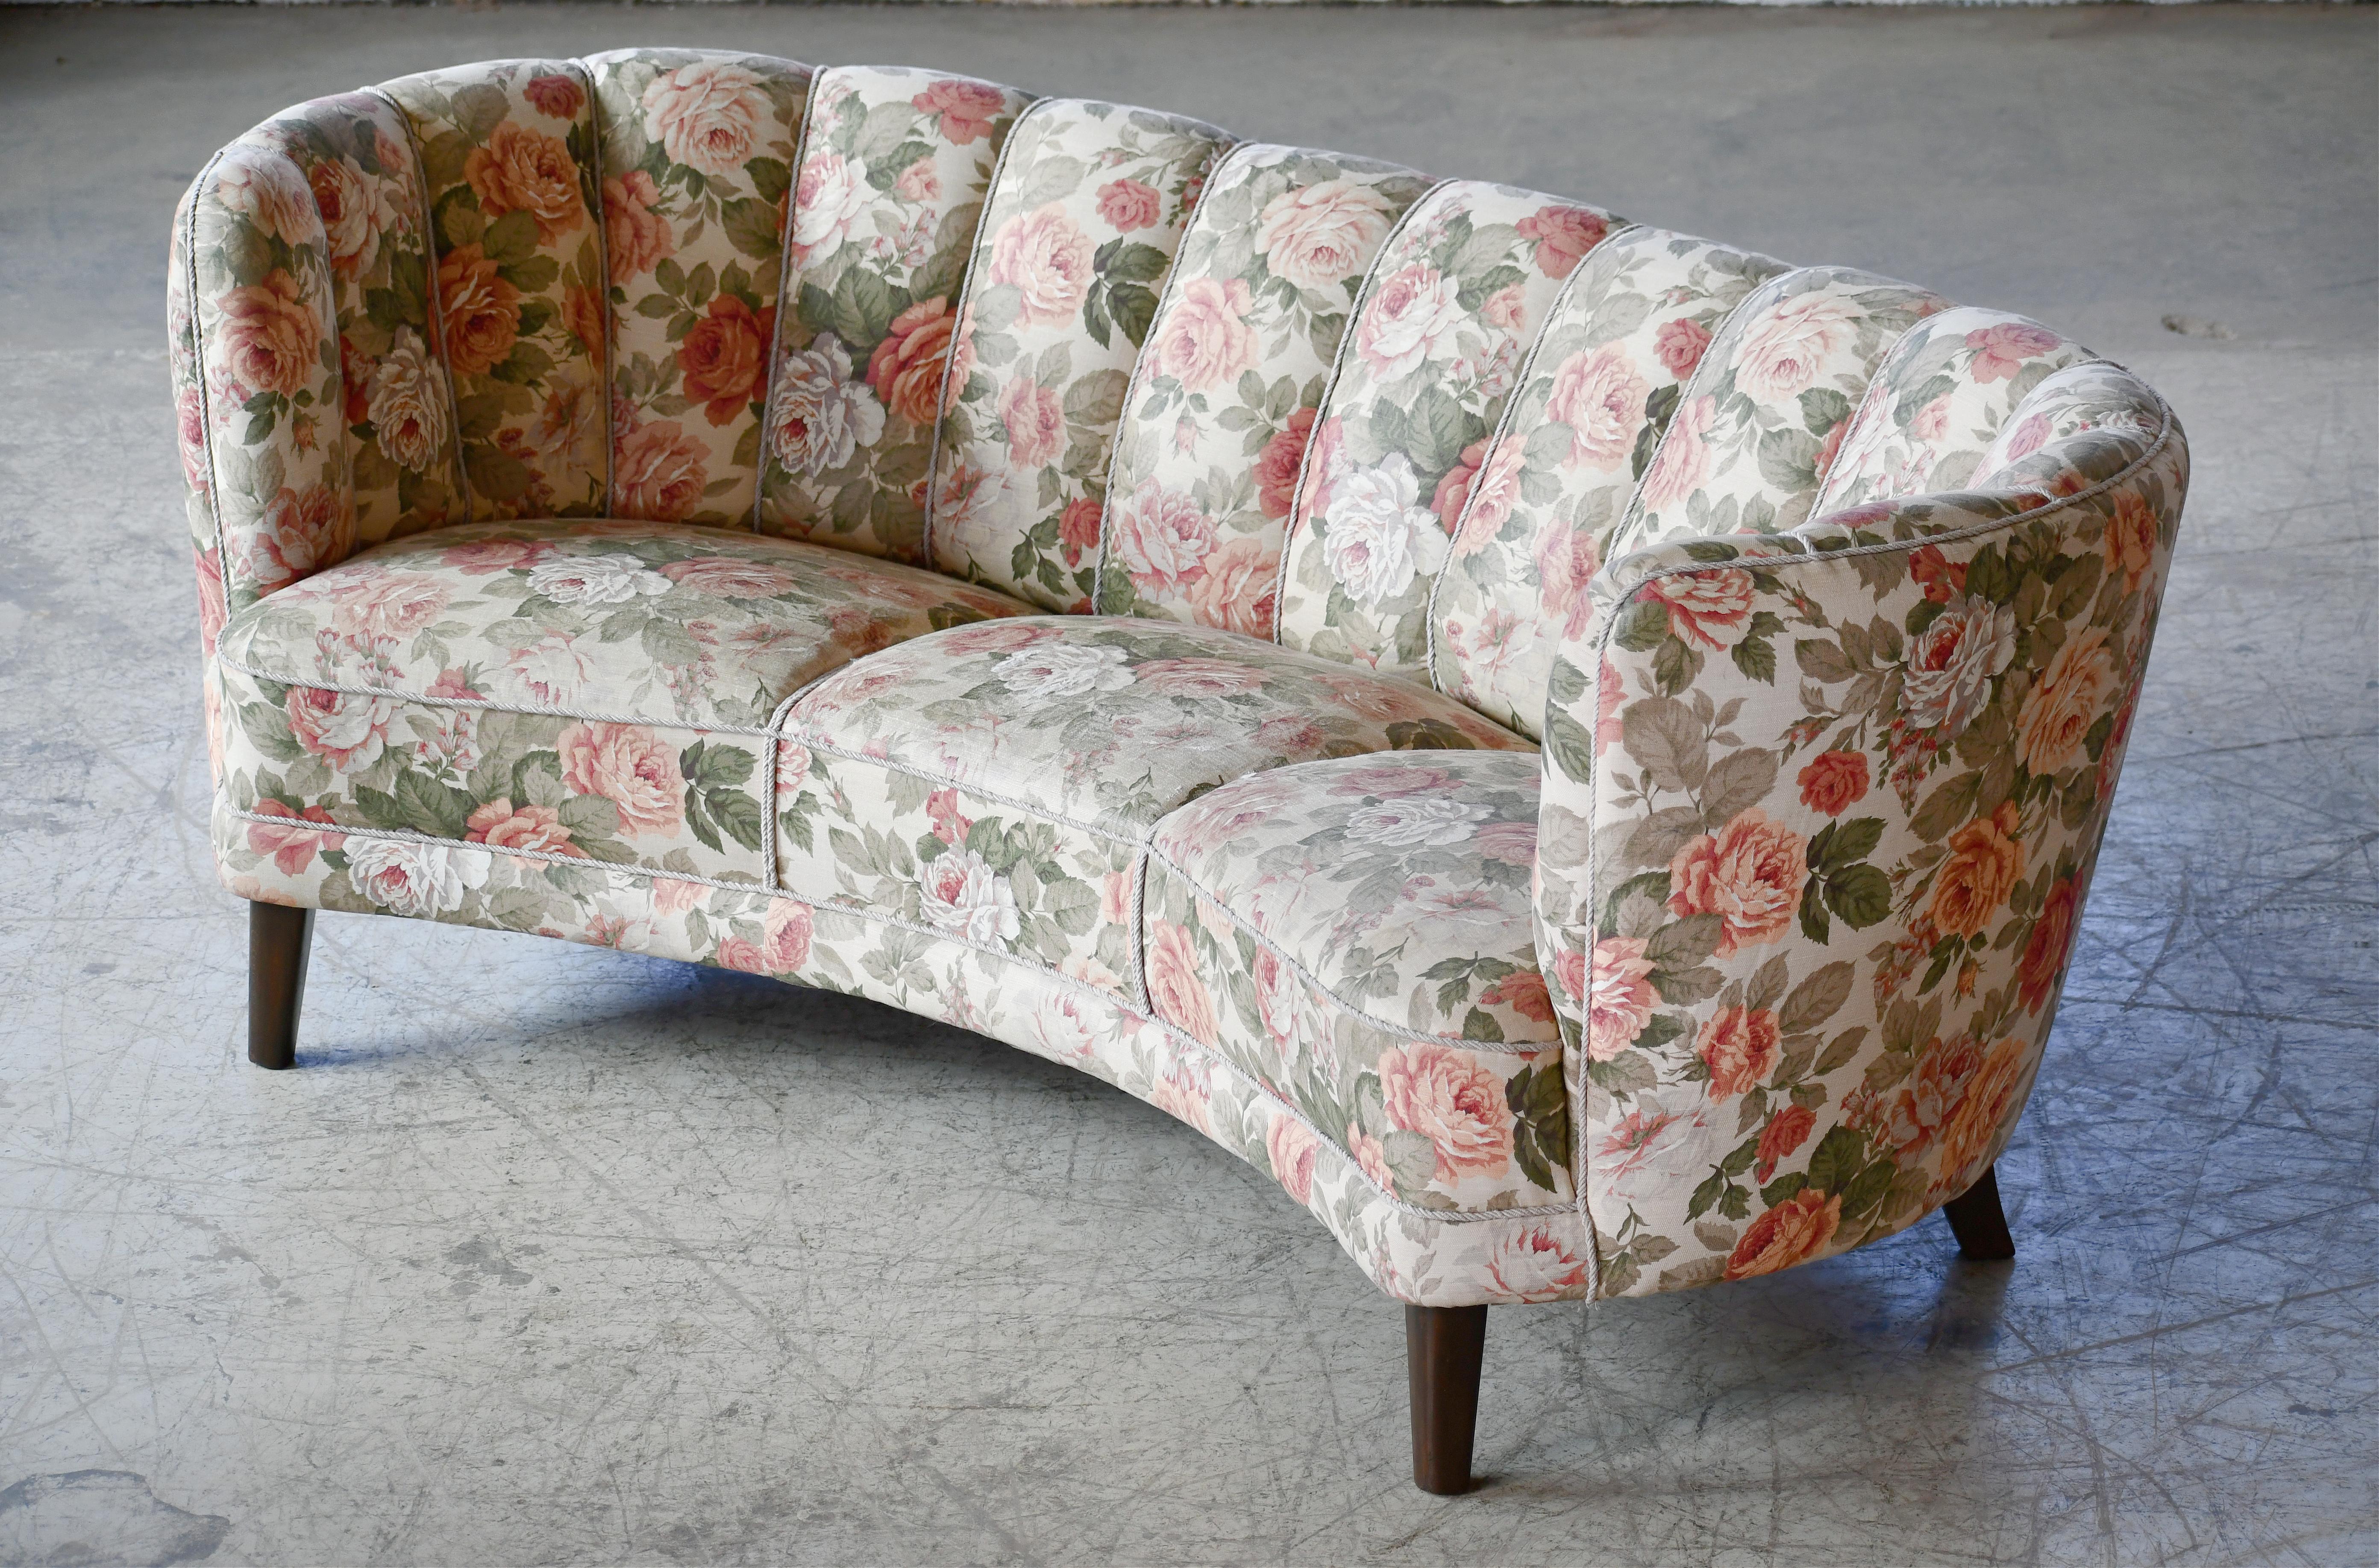 Beautiful and very elegant 1940s large Size curved three-seat sofa with channeled backrest. The sofa has springs in the seat and the backrest and the beechwood frame is solid and sturdy. The original wool fabric is showing minor wear but is in still